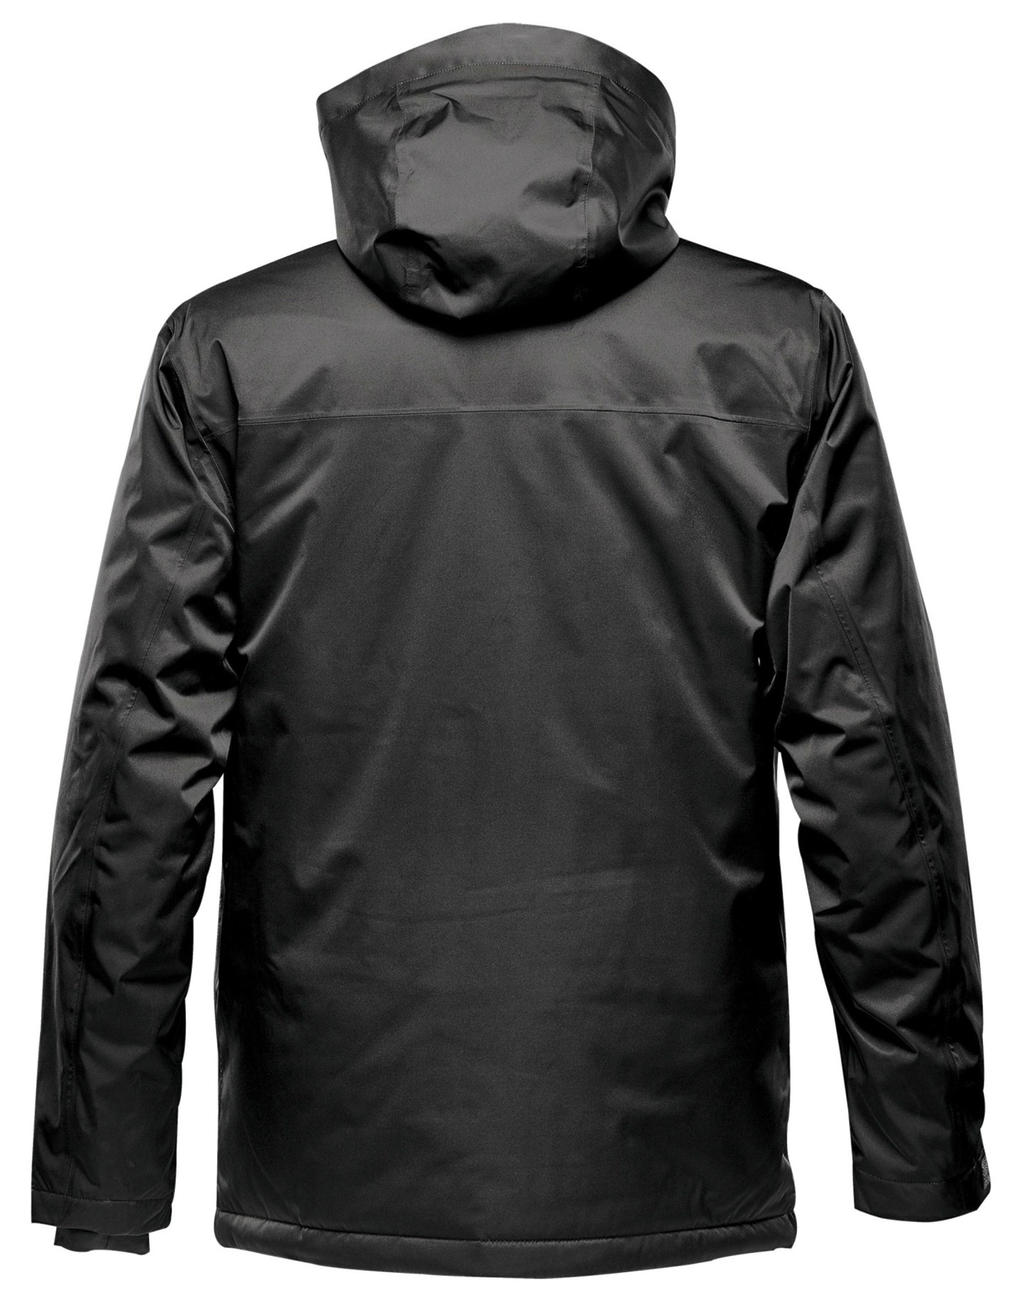  Zurich Thermal Jacket in Farbe Charcoal